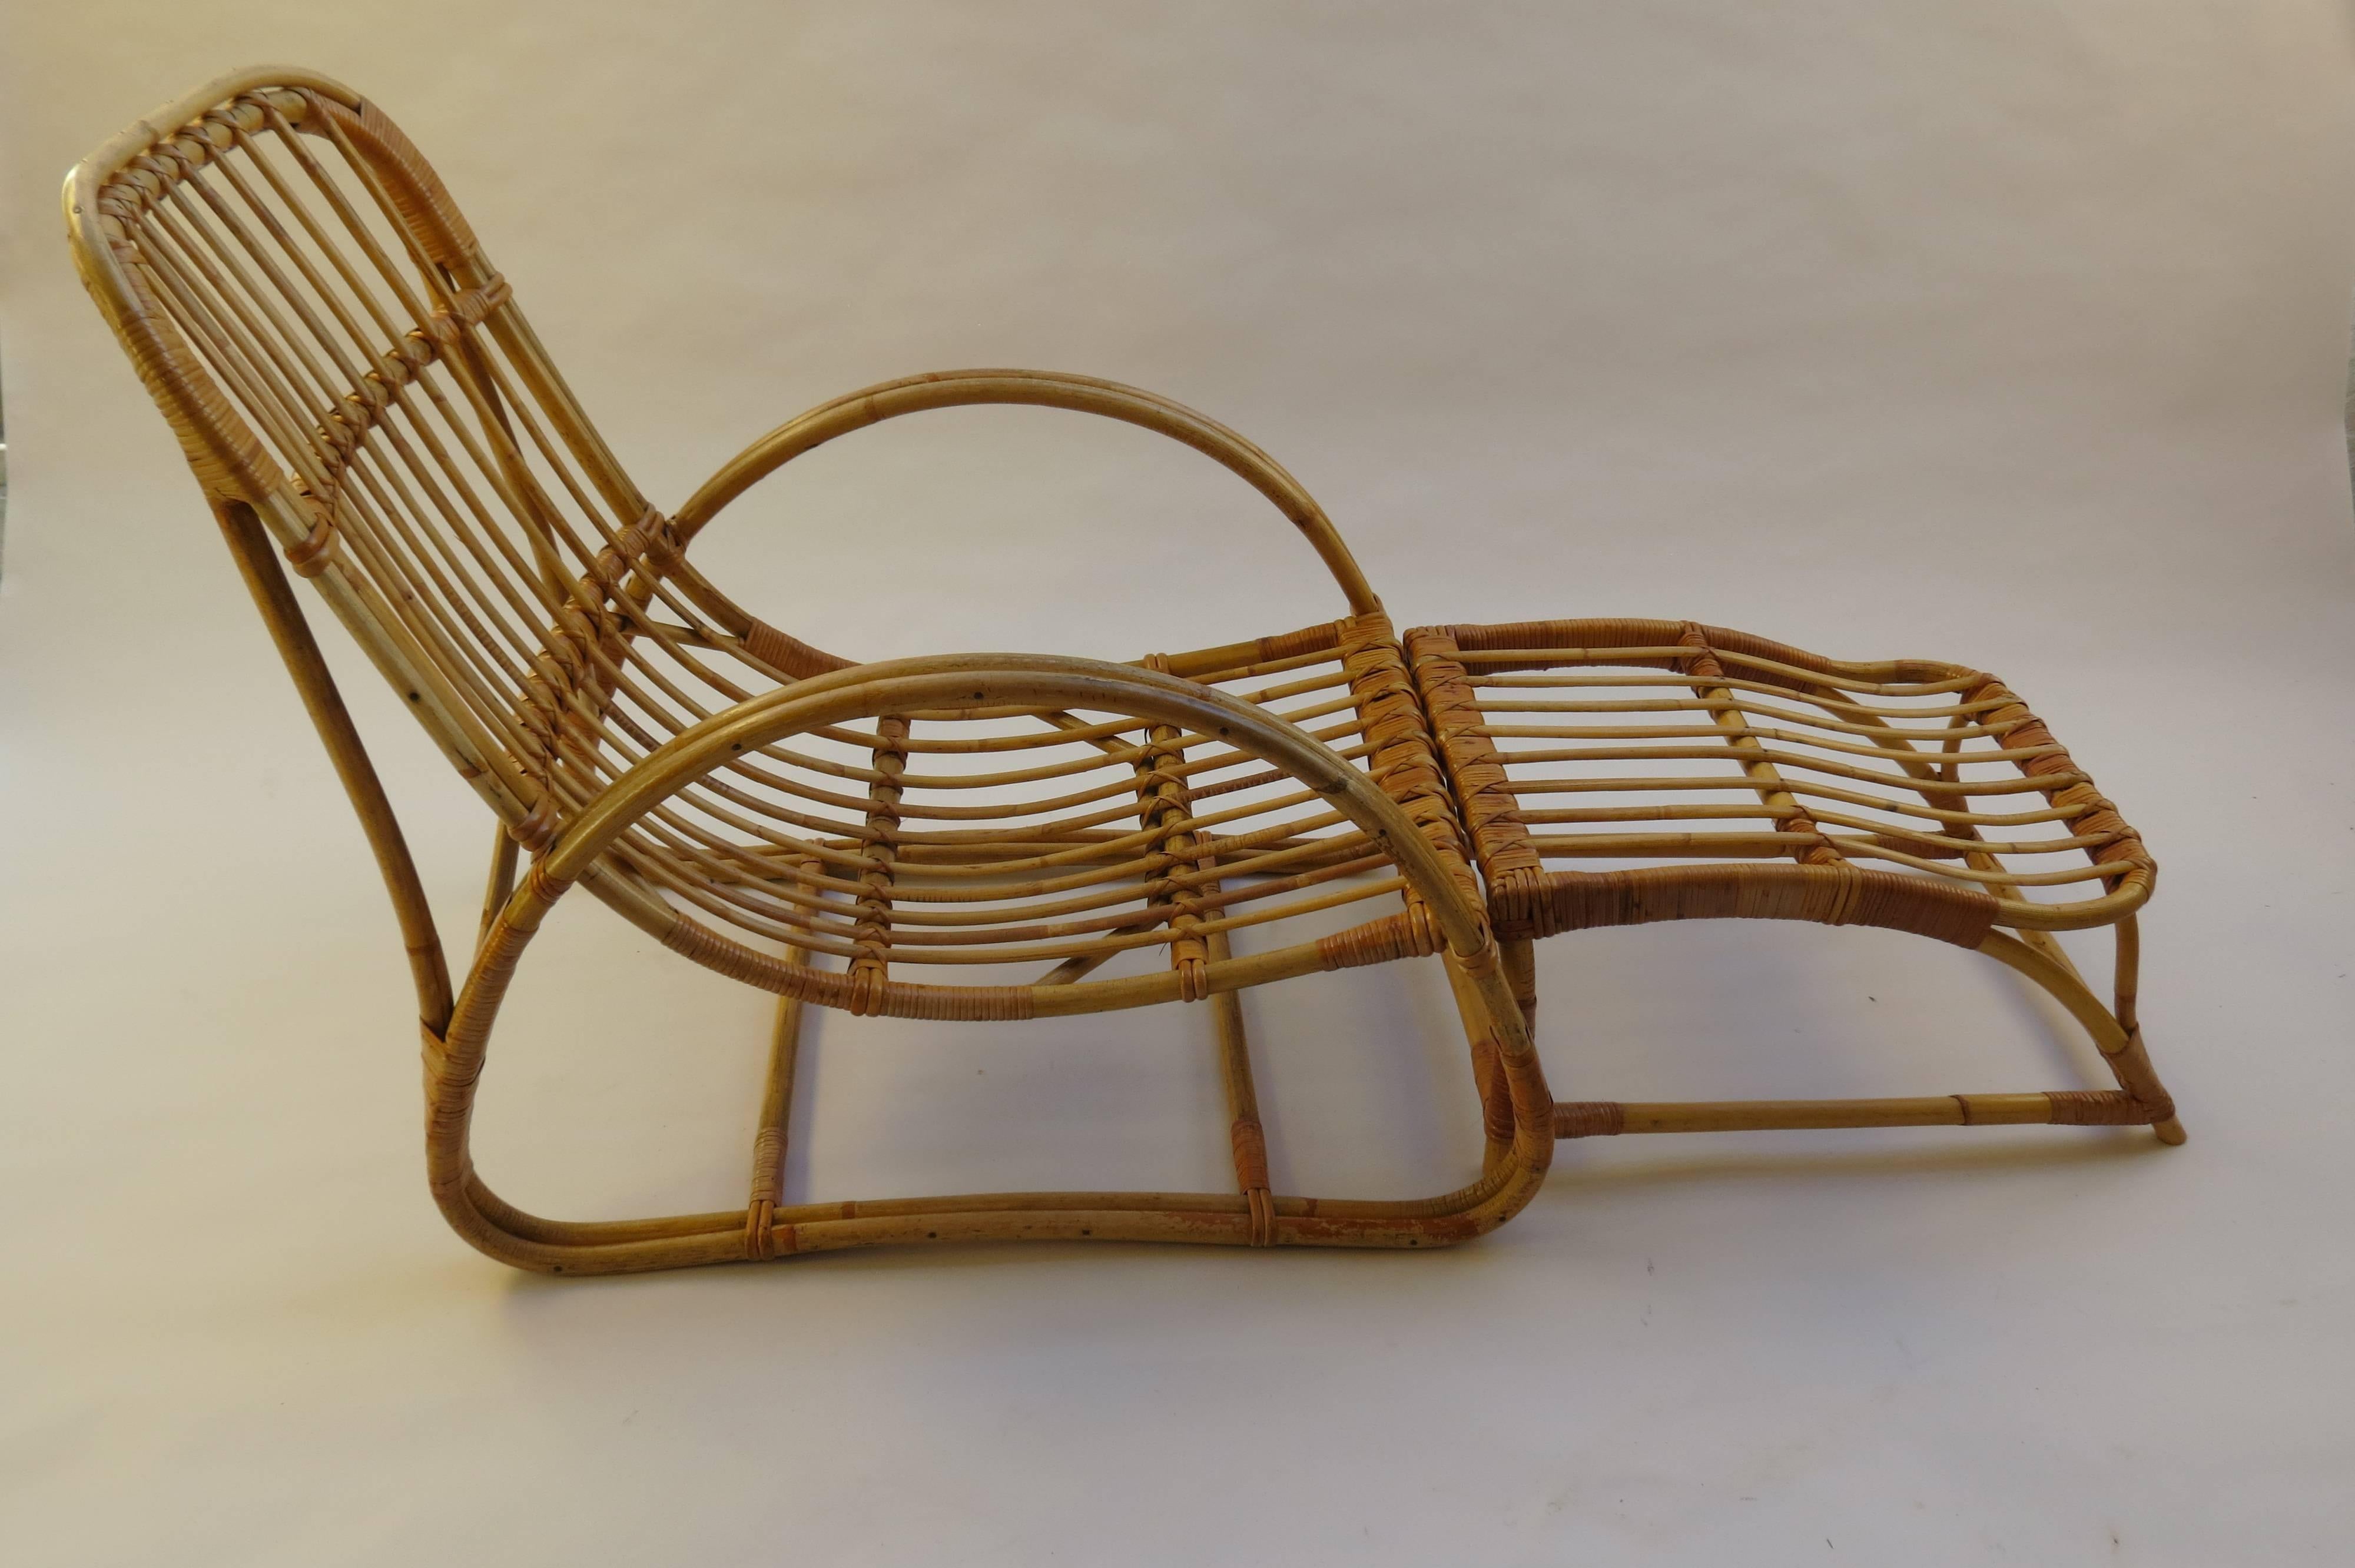 1960s cane and rattan lounge chairs and footstools. One chair retains the Dryad plaque and the other retains the plaque by Angraves, UK.
Plaque to the rear reads Dryad Leicester Cane Furniture
Plaque to the rear reads Angraves “Invincible” Brook St,